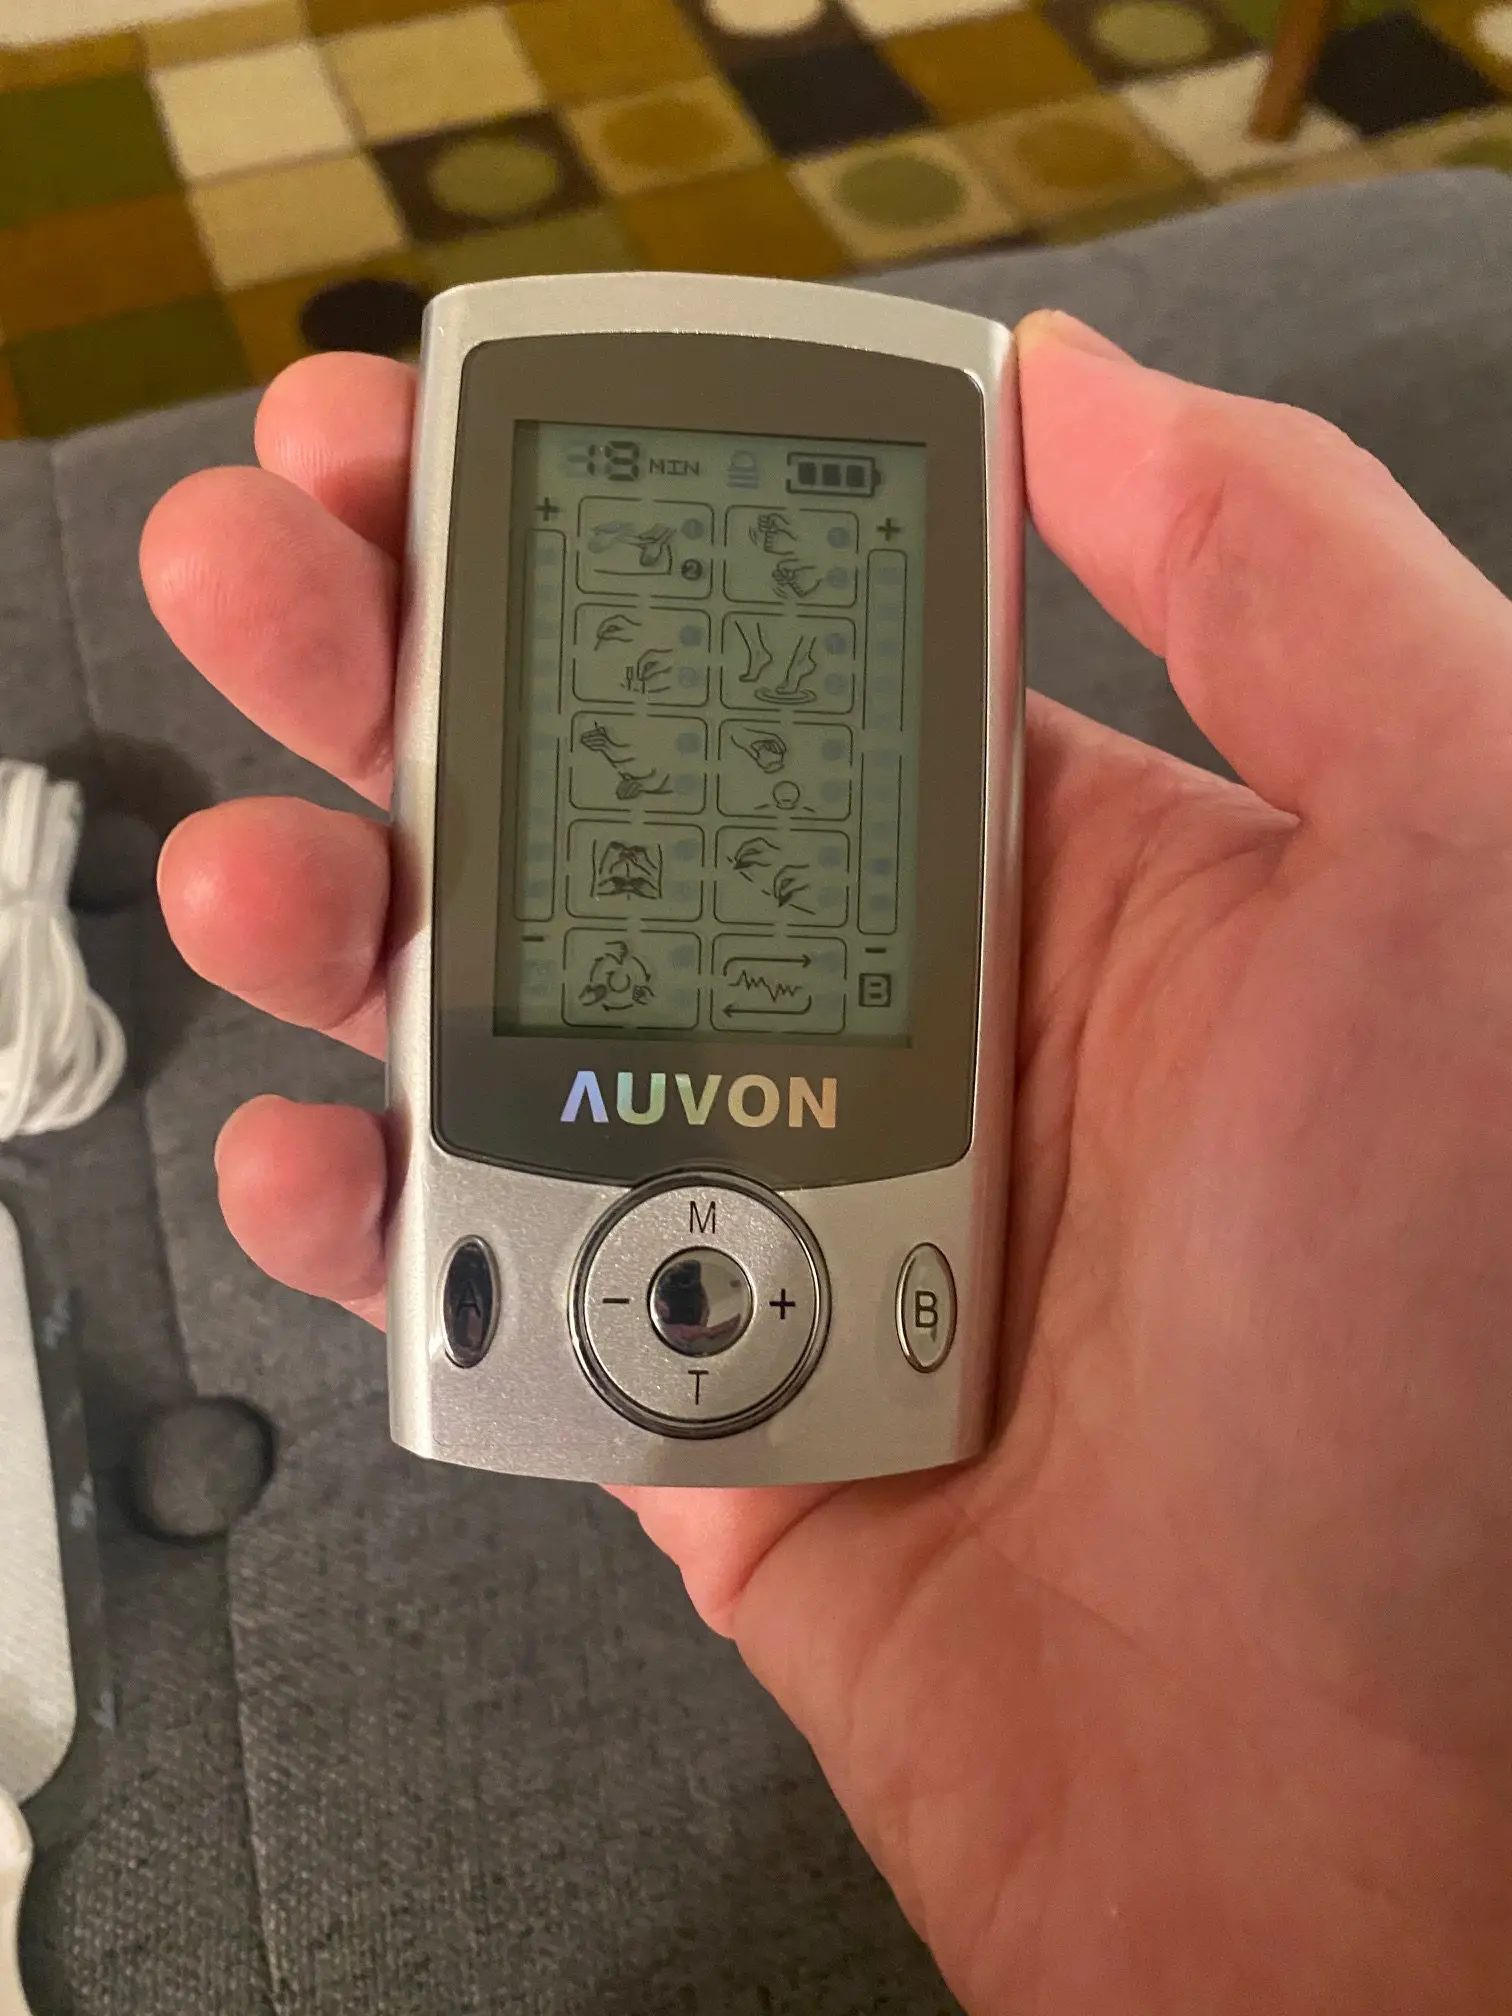 TENS Unit That's Not Working Properly